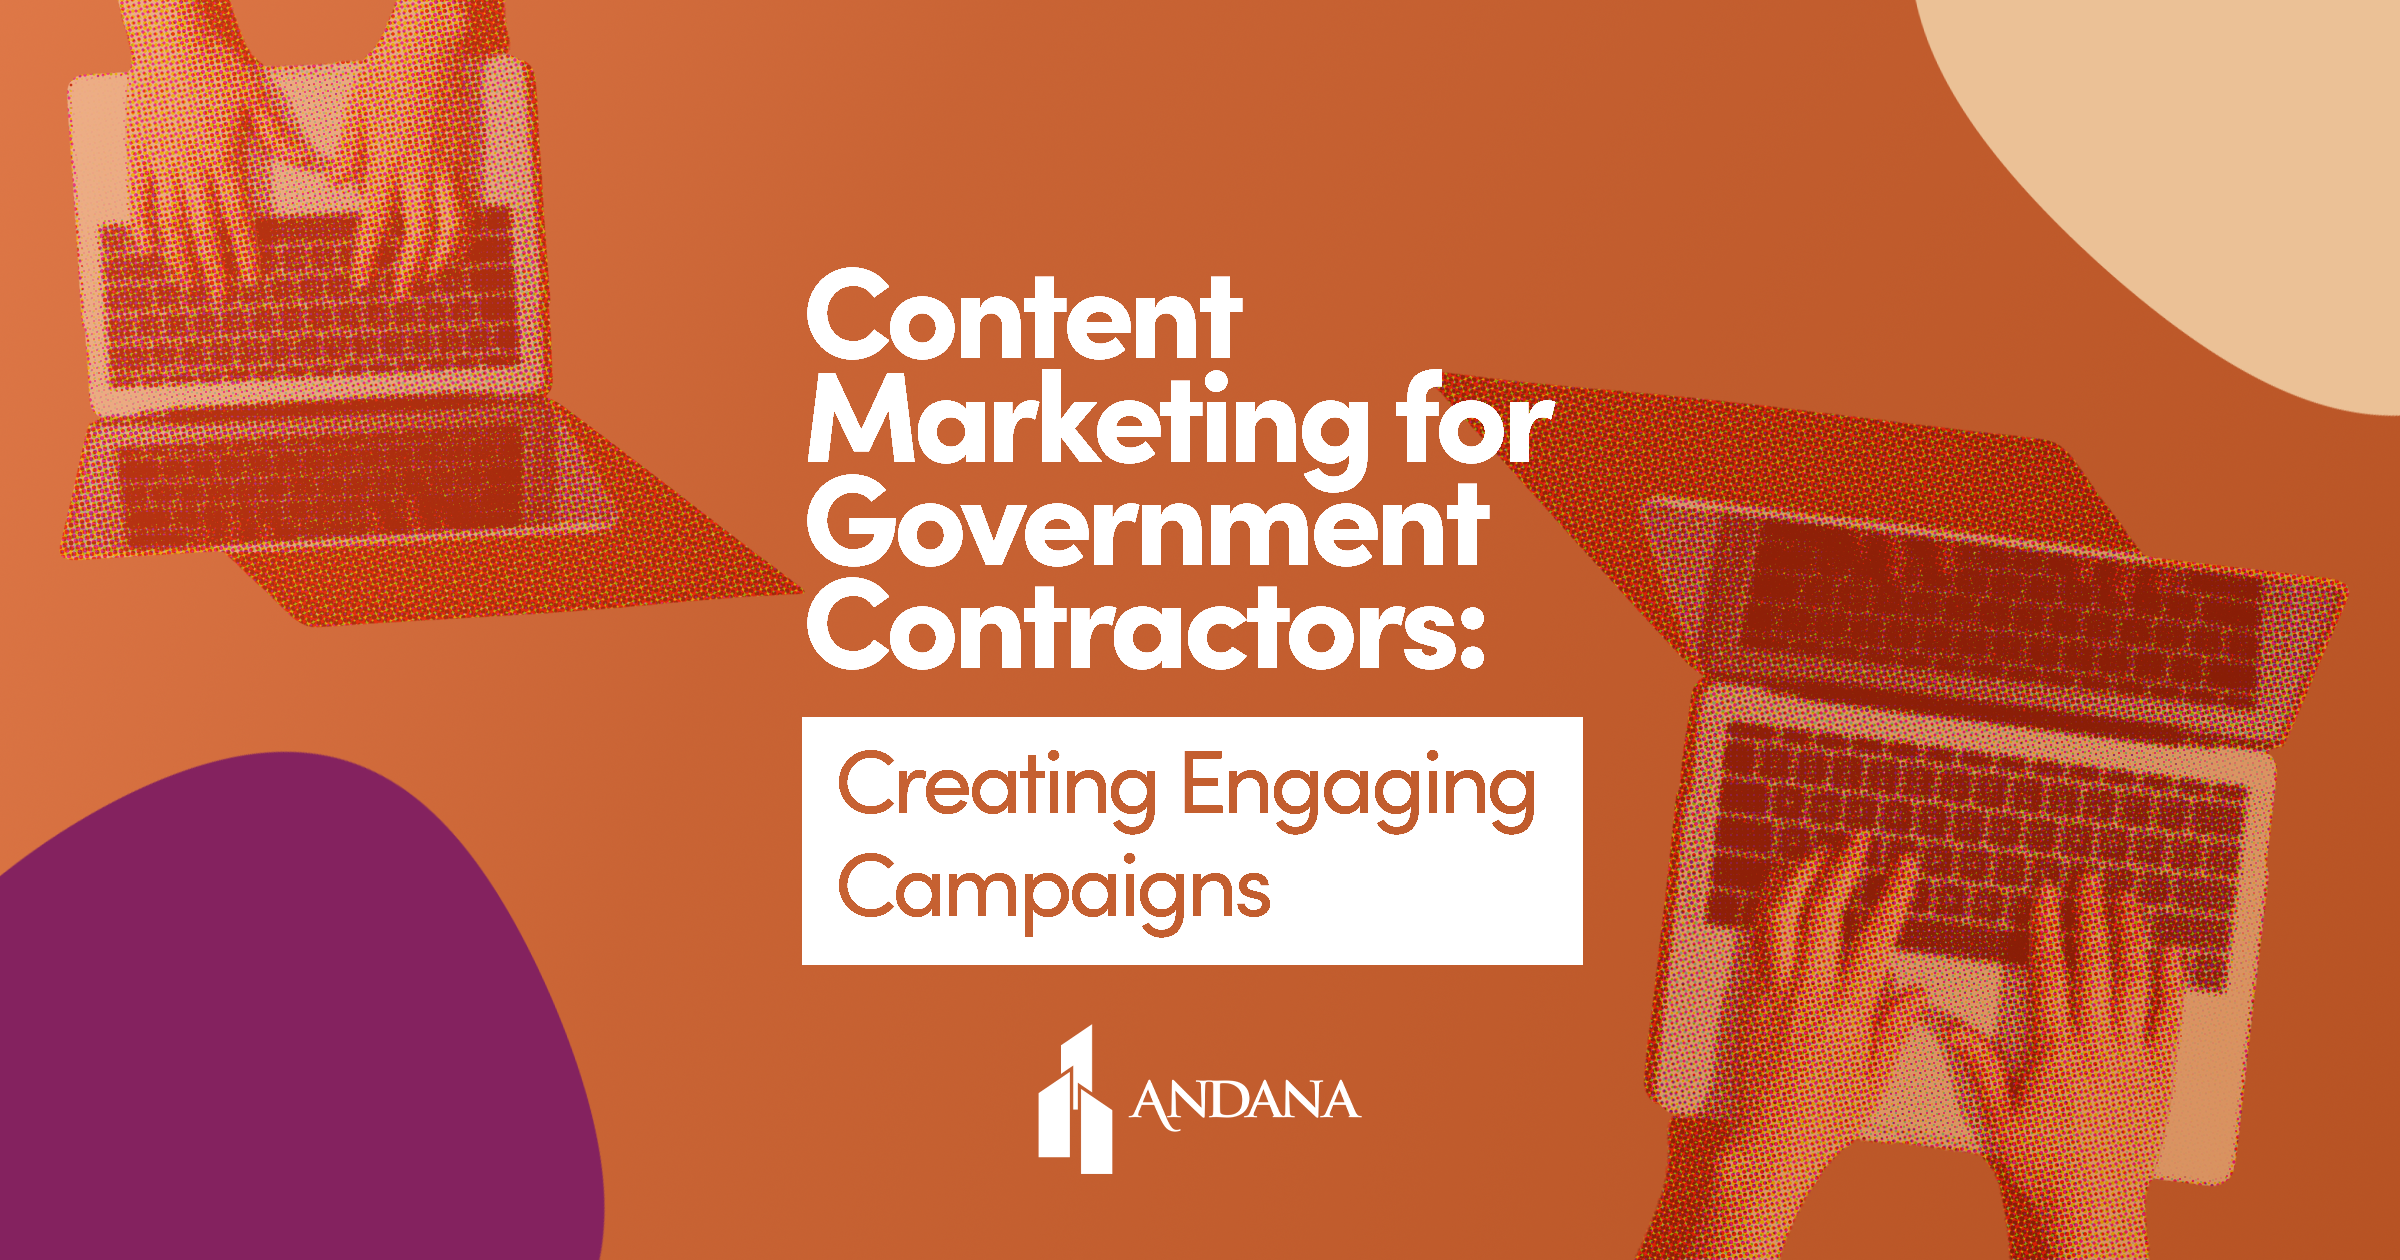 Content Marketing for Government Contractors: Creating Engaging Campaigns